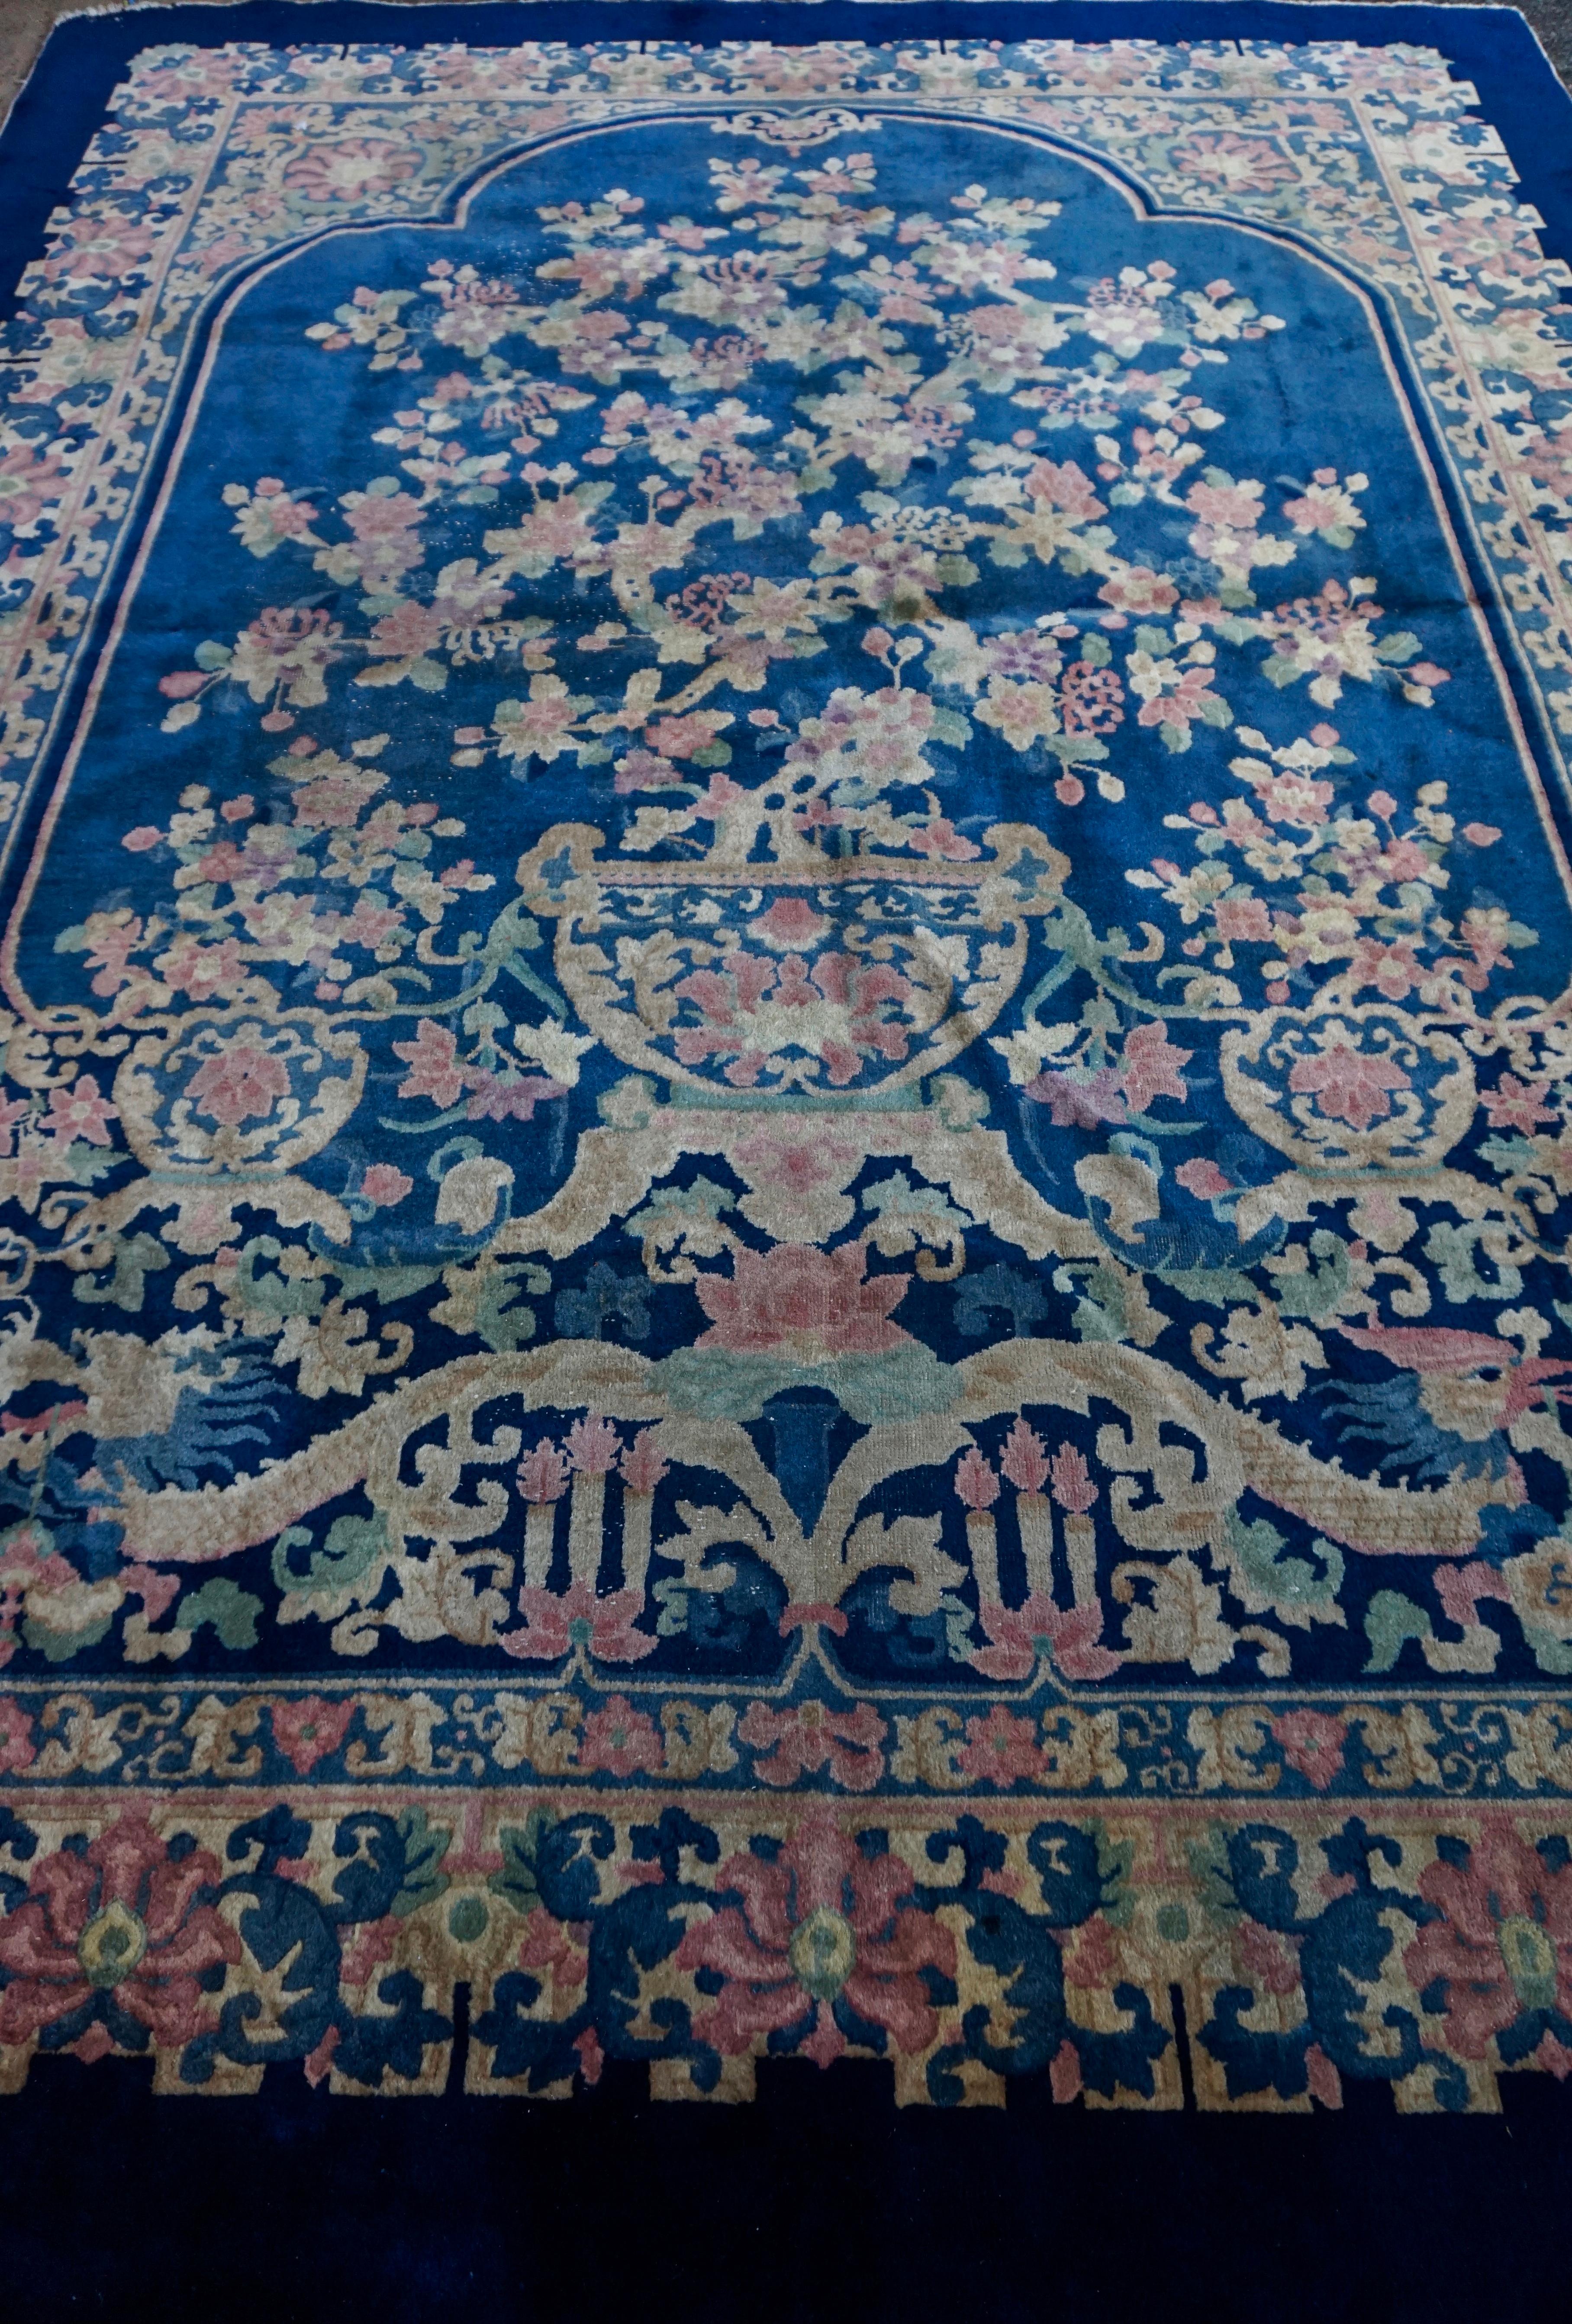 Rare Nichols rug with an unusual dragon and phoenix theme likely custom made. Blossoming honeysuckle plant flanked by smaller plants and perched above a dragon and phoenix (Yin & Yang or Success & Prosperity). The scene of bliss is framed within an